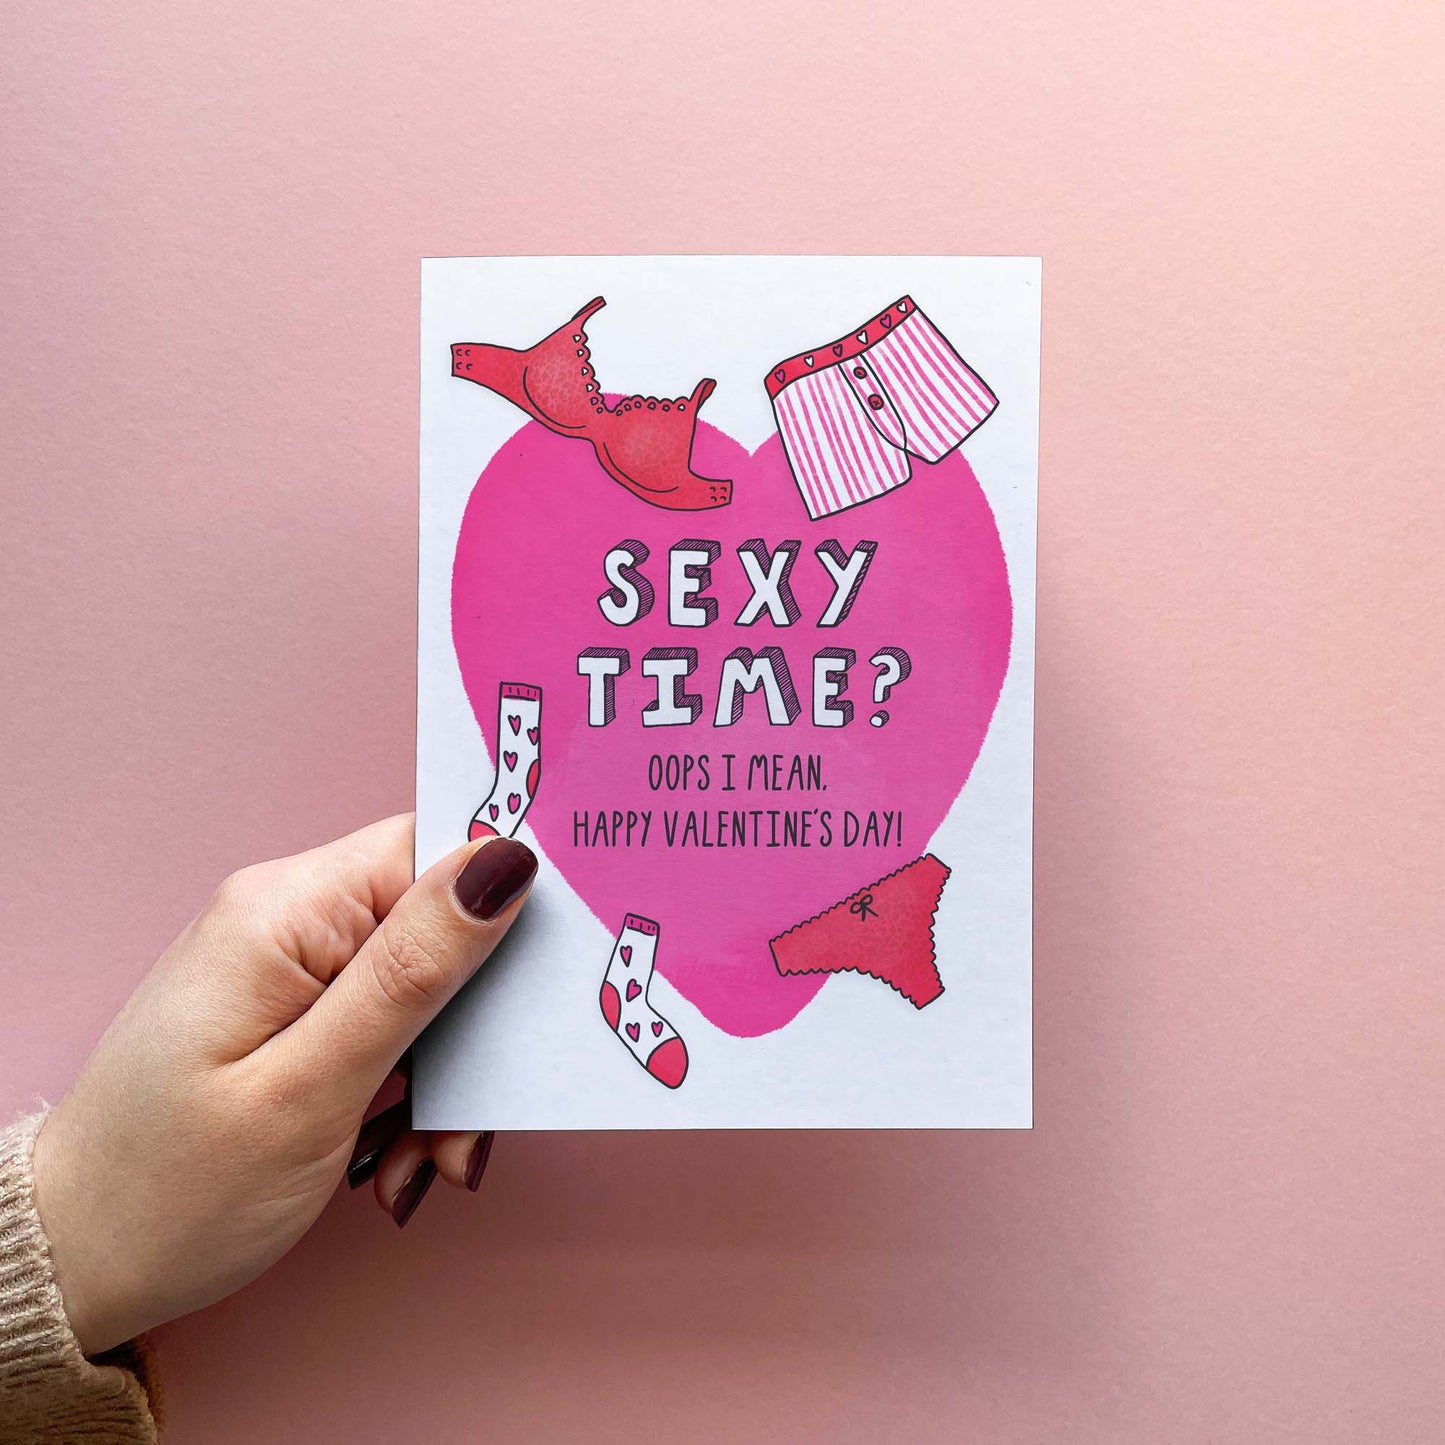 Sexy Time - Rude Valentine's Card